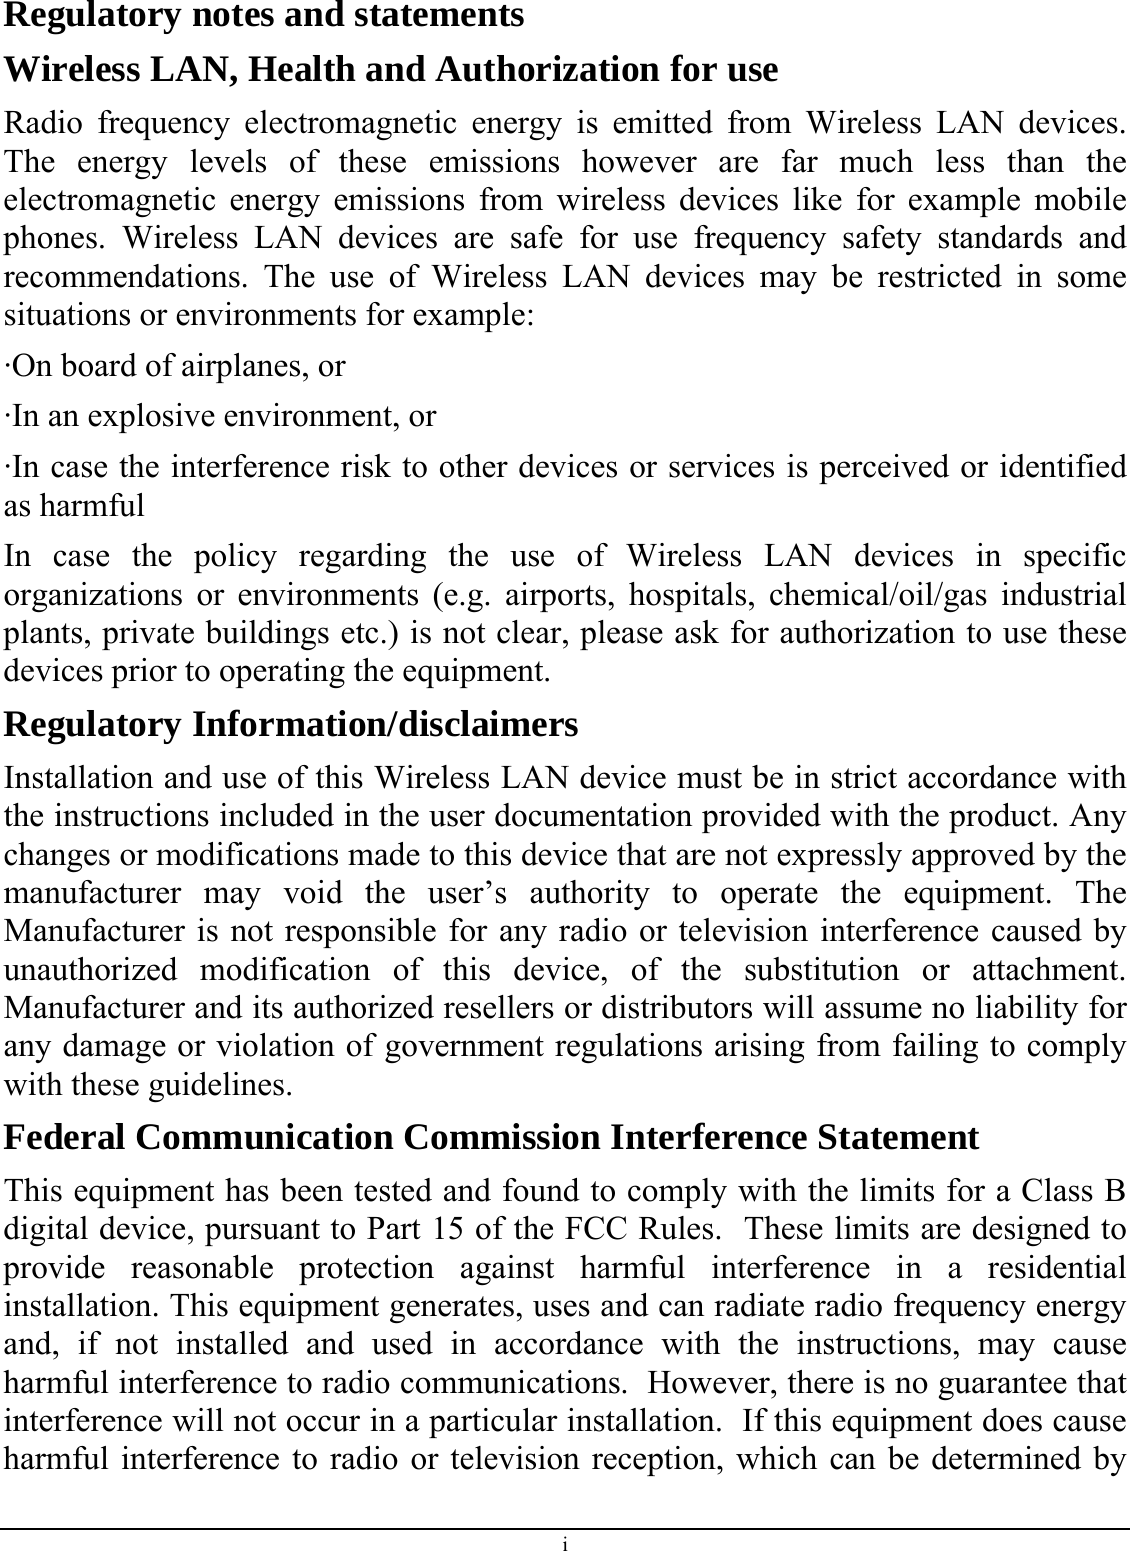 Regulatory notes and statements Wireless LAN, Health and Authorization for use Radio frequency electromagnetic energy is emitted from Wireless LAN devices. The energy levels of these emissions however are far much less than the electromagnetic energy emissions from wireless devices like for example mobile phones. Wireless LAN devices are safe for use frequency safety standards and recommendations. The use of Wireless LAN devices may be restricted in some situations or environments for example: ·On board of airplanes, or ·In an explosive environment, or ·In case the interference risk to other devices or services is perceived or identified as harmful In case the policy regarding the use of Wireless LAN devices in specific organizations or environments (e.g. airports, hospitals, chemical/oil/gas industrial plants, private buildings etc.) is not clear, please ask for authorization to use these devices prior to operating the equipment. Regulatory Information/disclaimers Installation and use of this Wireless LAN device must be in strict accordance with the instructions included in the user documentation provided with the product. Any changes or modifications made to this device that are not expressly approved by the manufacturer may void the user’s authority to operate the equipment. The Manufacturer is not responsible for any radio or television interference caused by unauthorized modification of this device, of the substitution or attachment. Manufacturer and its authorized resellers or distributors will assume no liability for any damage or violation of government regulations arising from failing to comply with these guidelines. Federal Communication Commission Interference Statement This equipment has been tested and found to comply with the limits for a Class B digital device, pursuant to Part 15 of the FCC Rules.  These limits are designed to provide reasonable protection against harmful interference in a residential installation. This equipment generates, uses and can radiate radio frequency energy and, if not installed and used in accordance with the instructions, may cause harmful interference to radio communications.  However, there is no guarantee that interference will not occur in a particular installation.  If this equipment does cause harmful interference to radio or television reception, which can be determined by i 